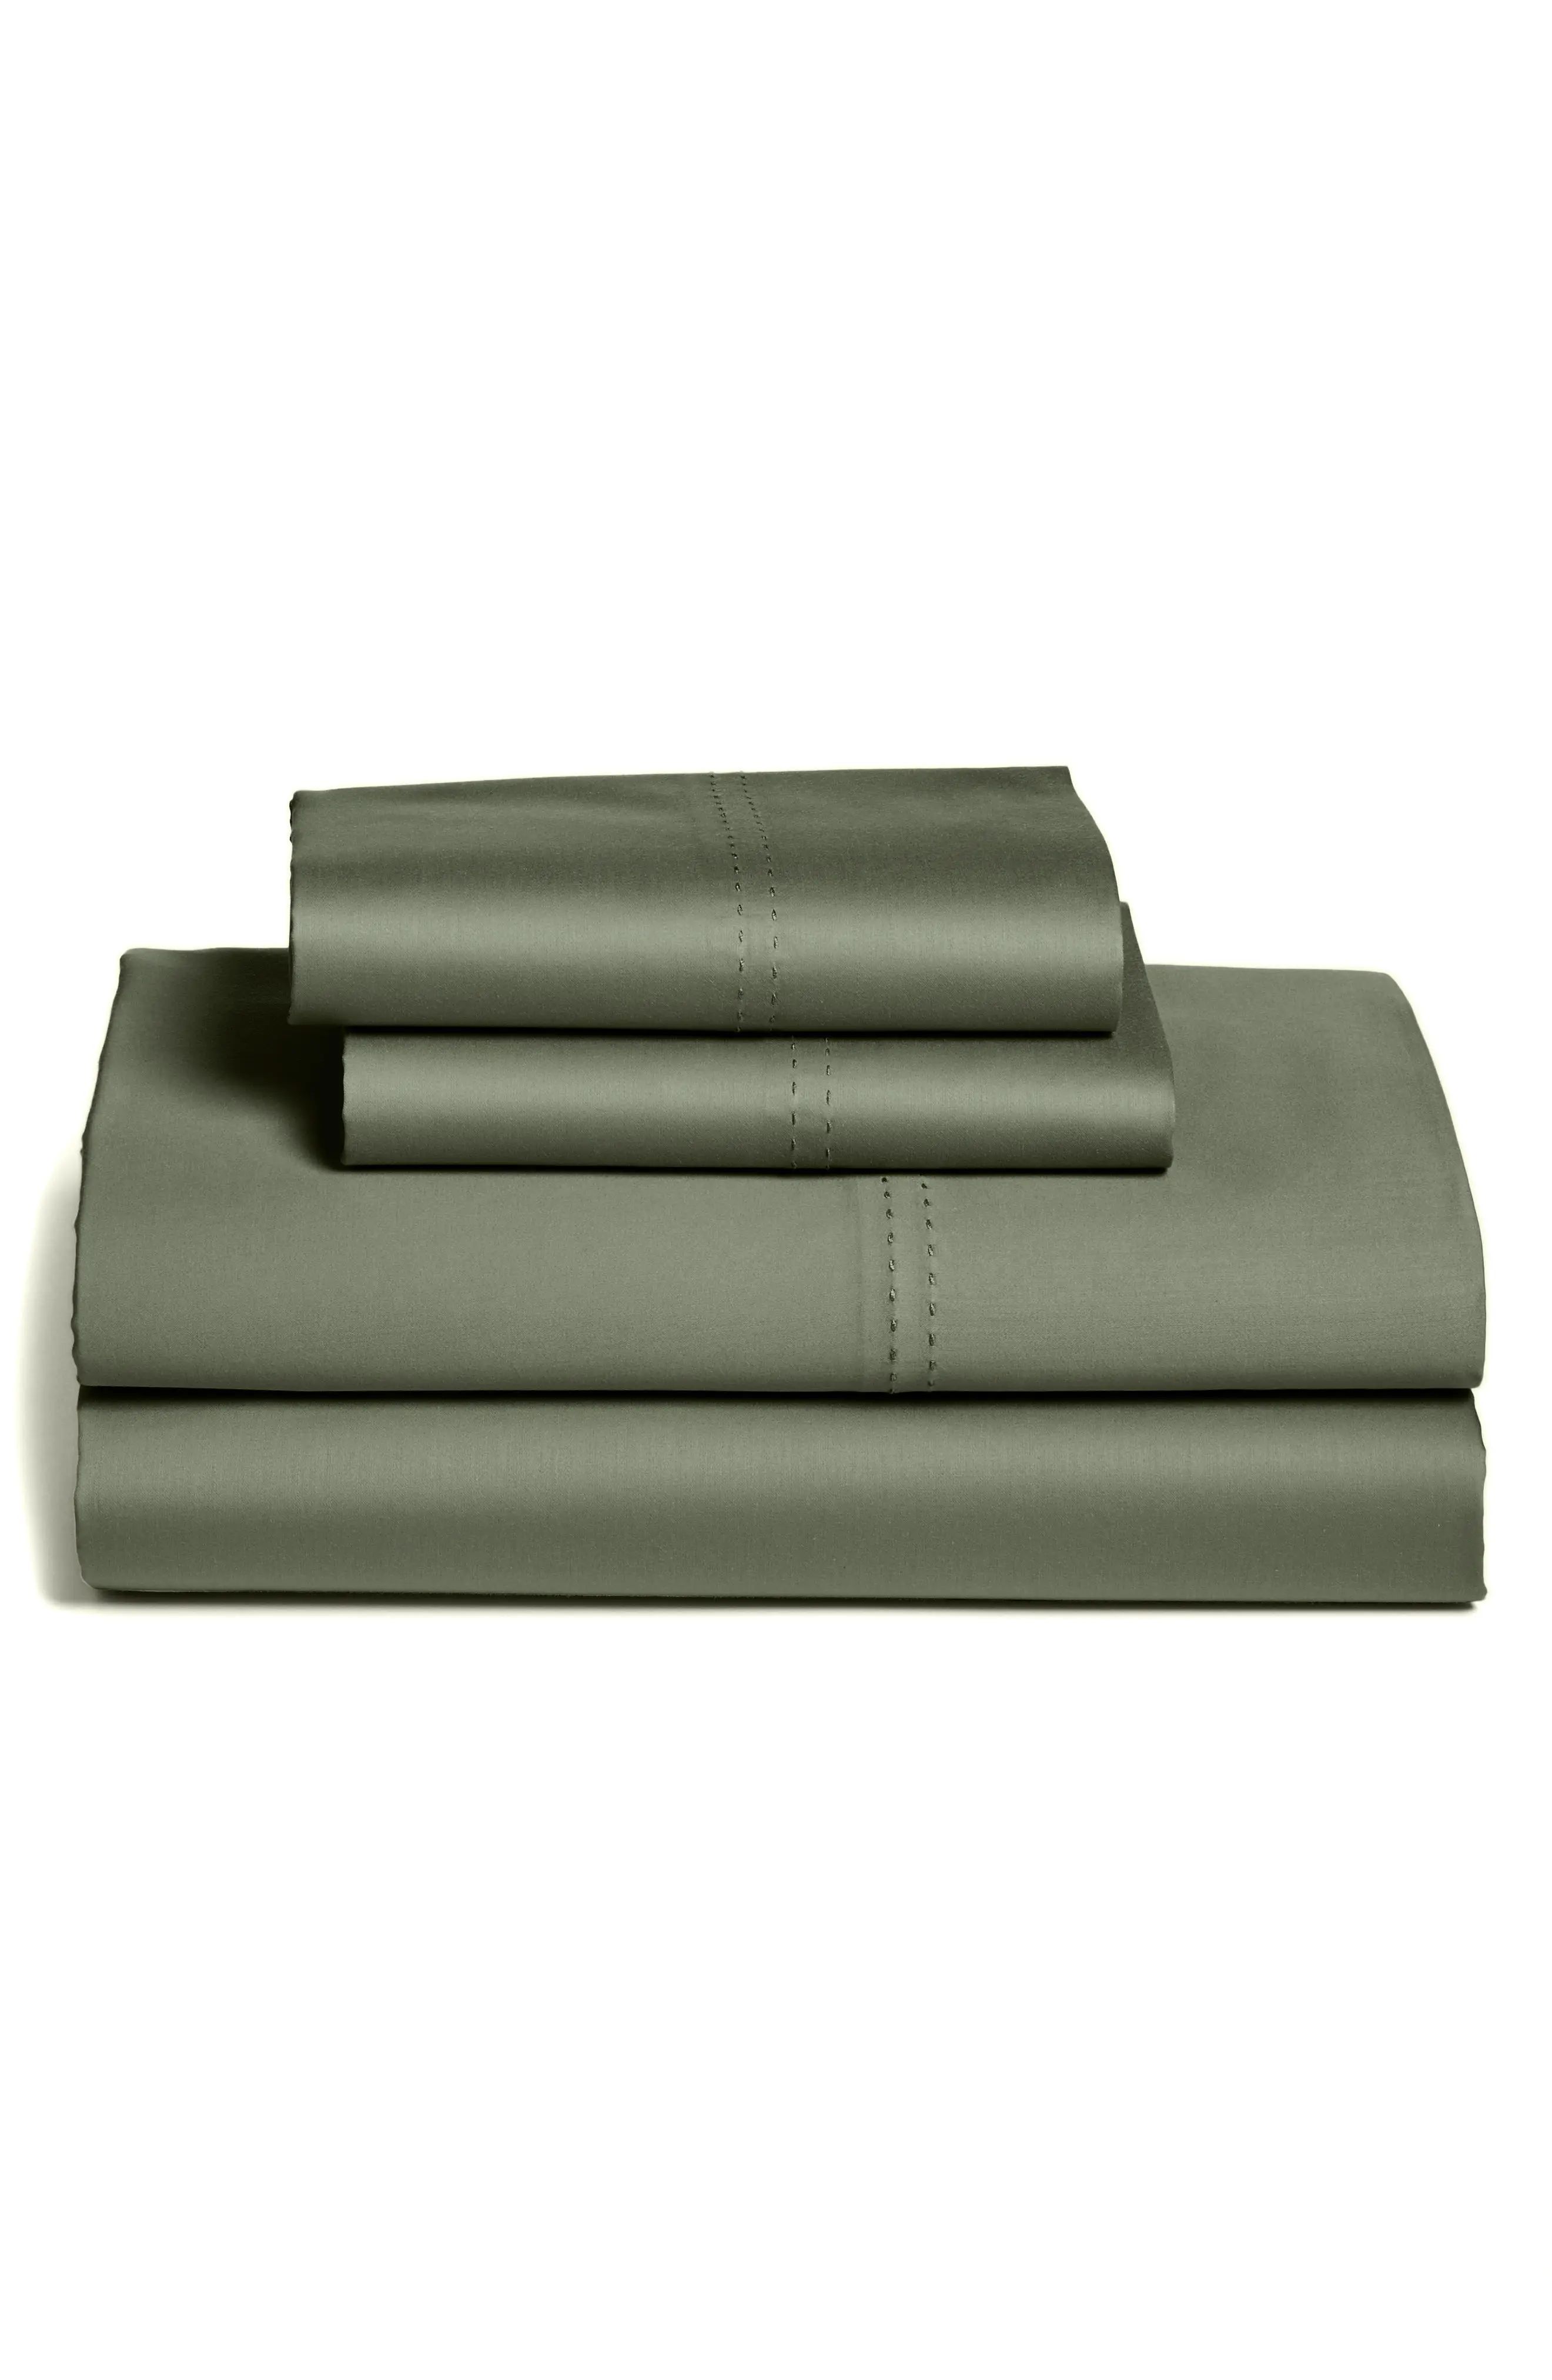 Nordstrom at Home 400 Thread Count Sheet Set in Green Lichen at Nordstrom, Size California King | Nordstrom